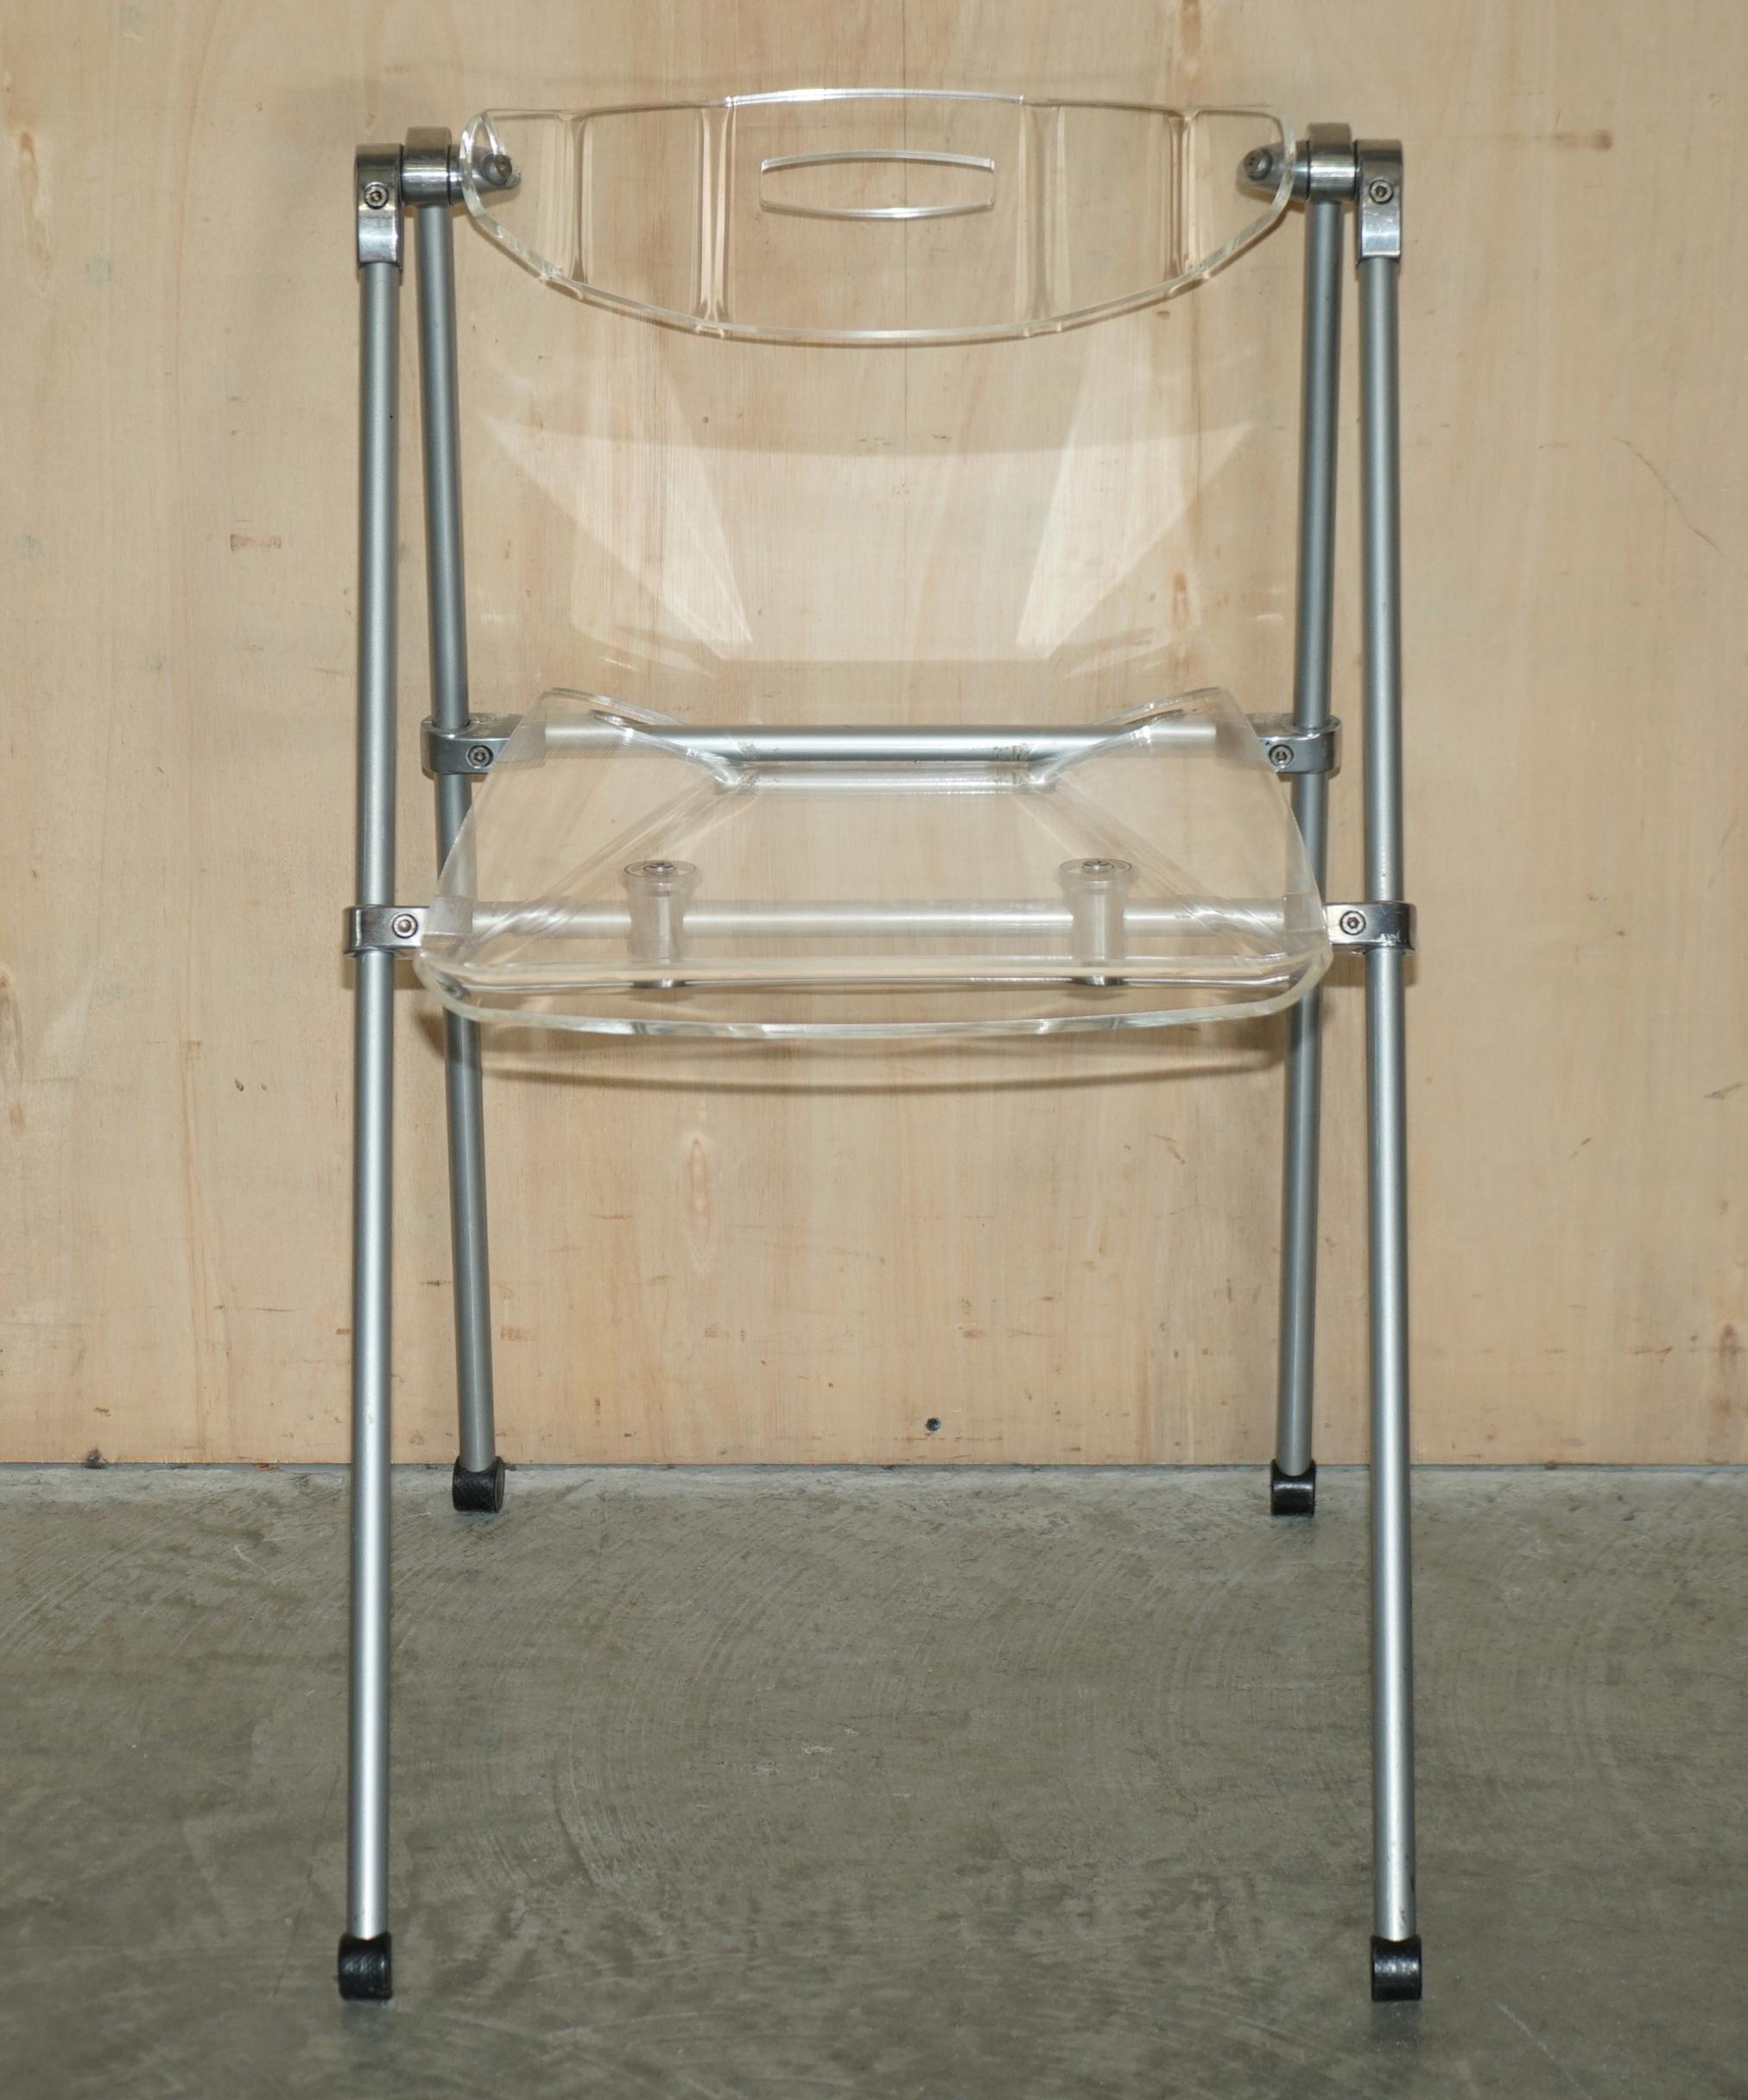 We are delighted to offer for sale this very cool over engineered lucite and steel folding chair with swinging back rest

A very well made chair, the frame is super industrial and it has a thick comfortable Lucite set and back rest. The back rest